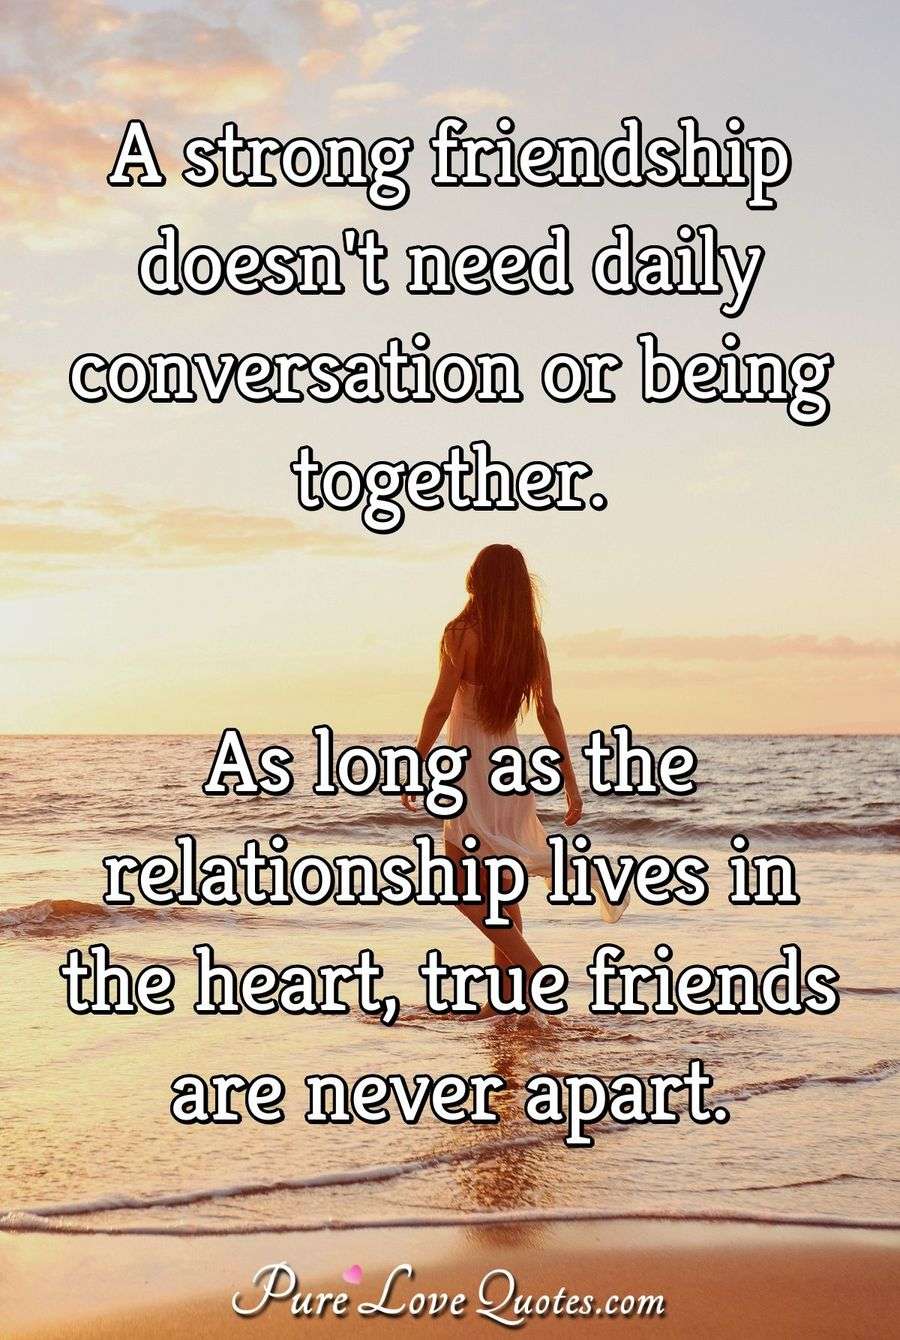 A strong friendship doesn't need daily conversation or being together